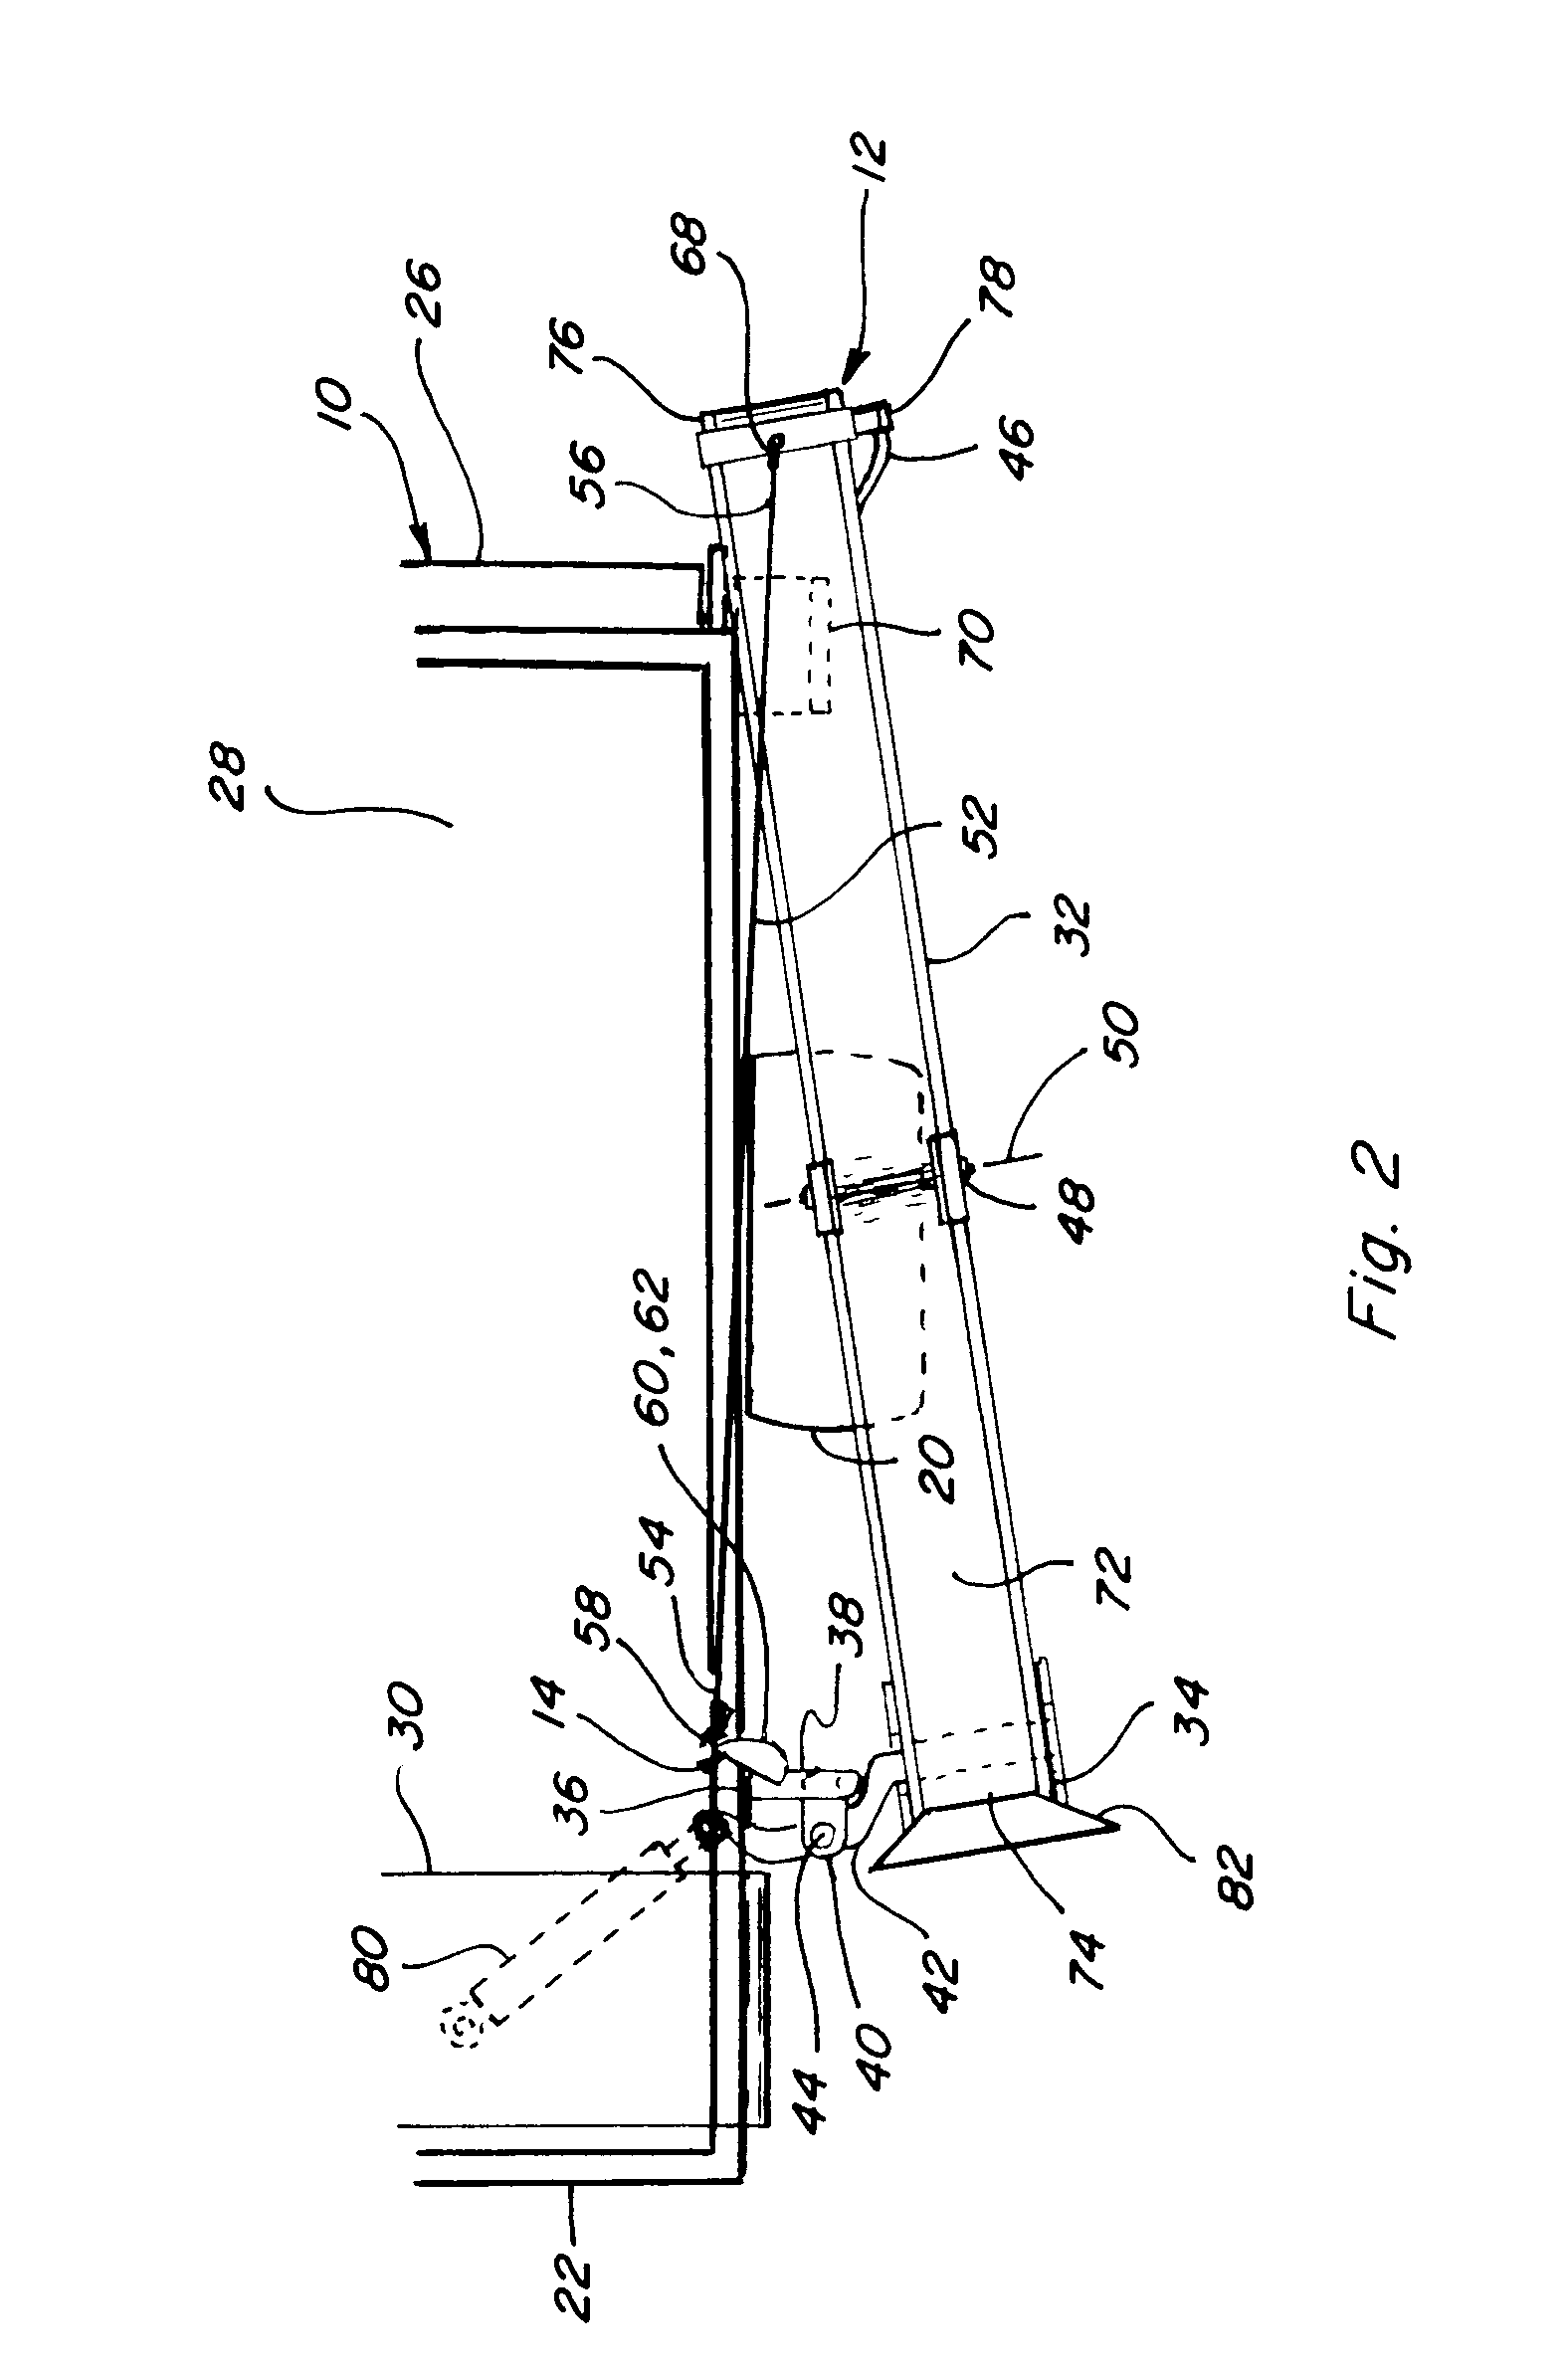 Unloader system with cam operated raise system